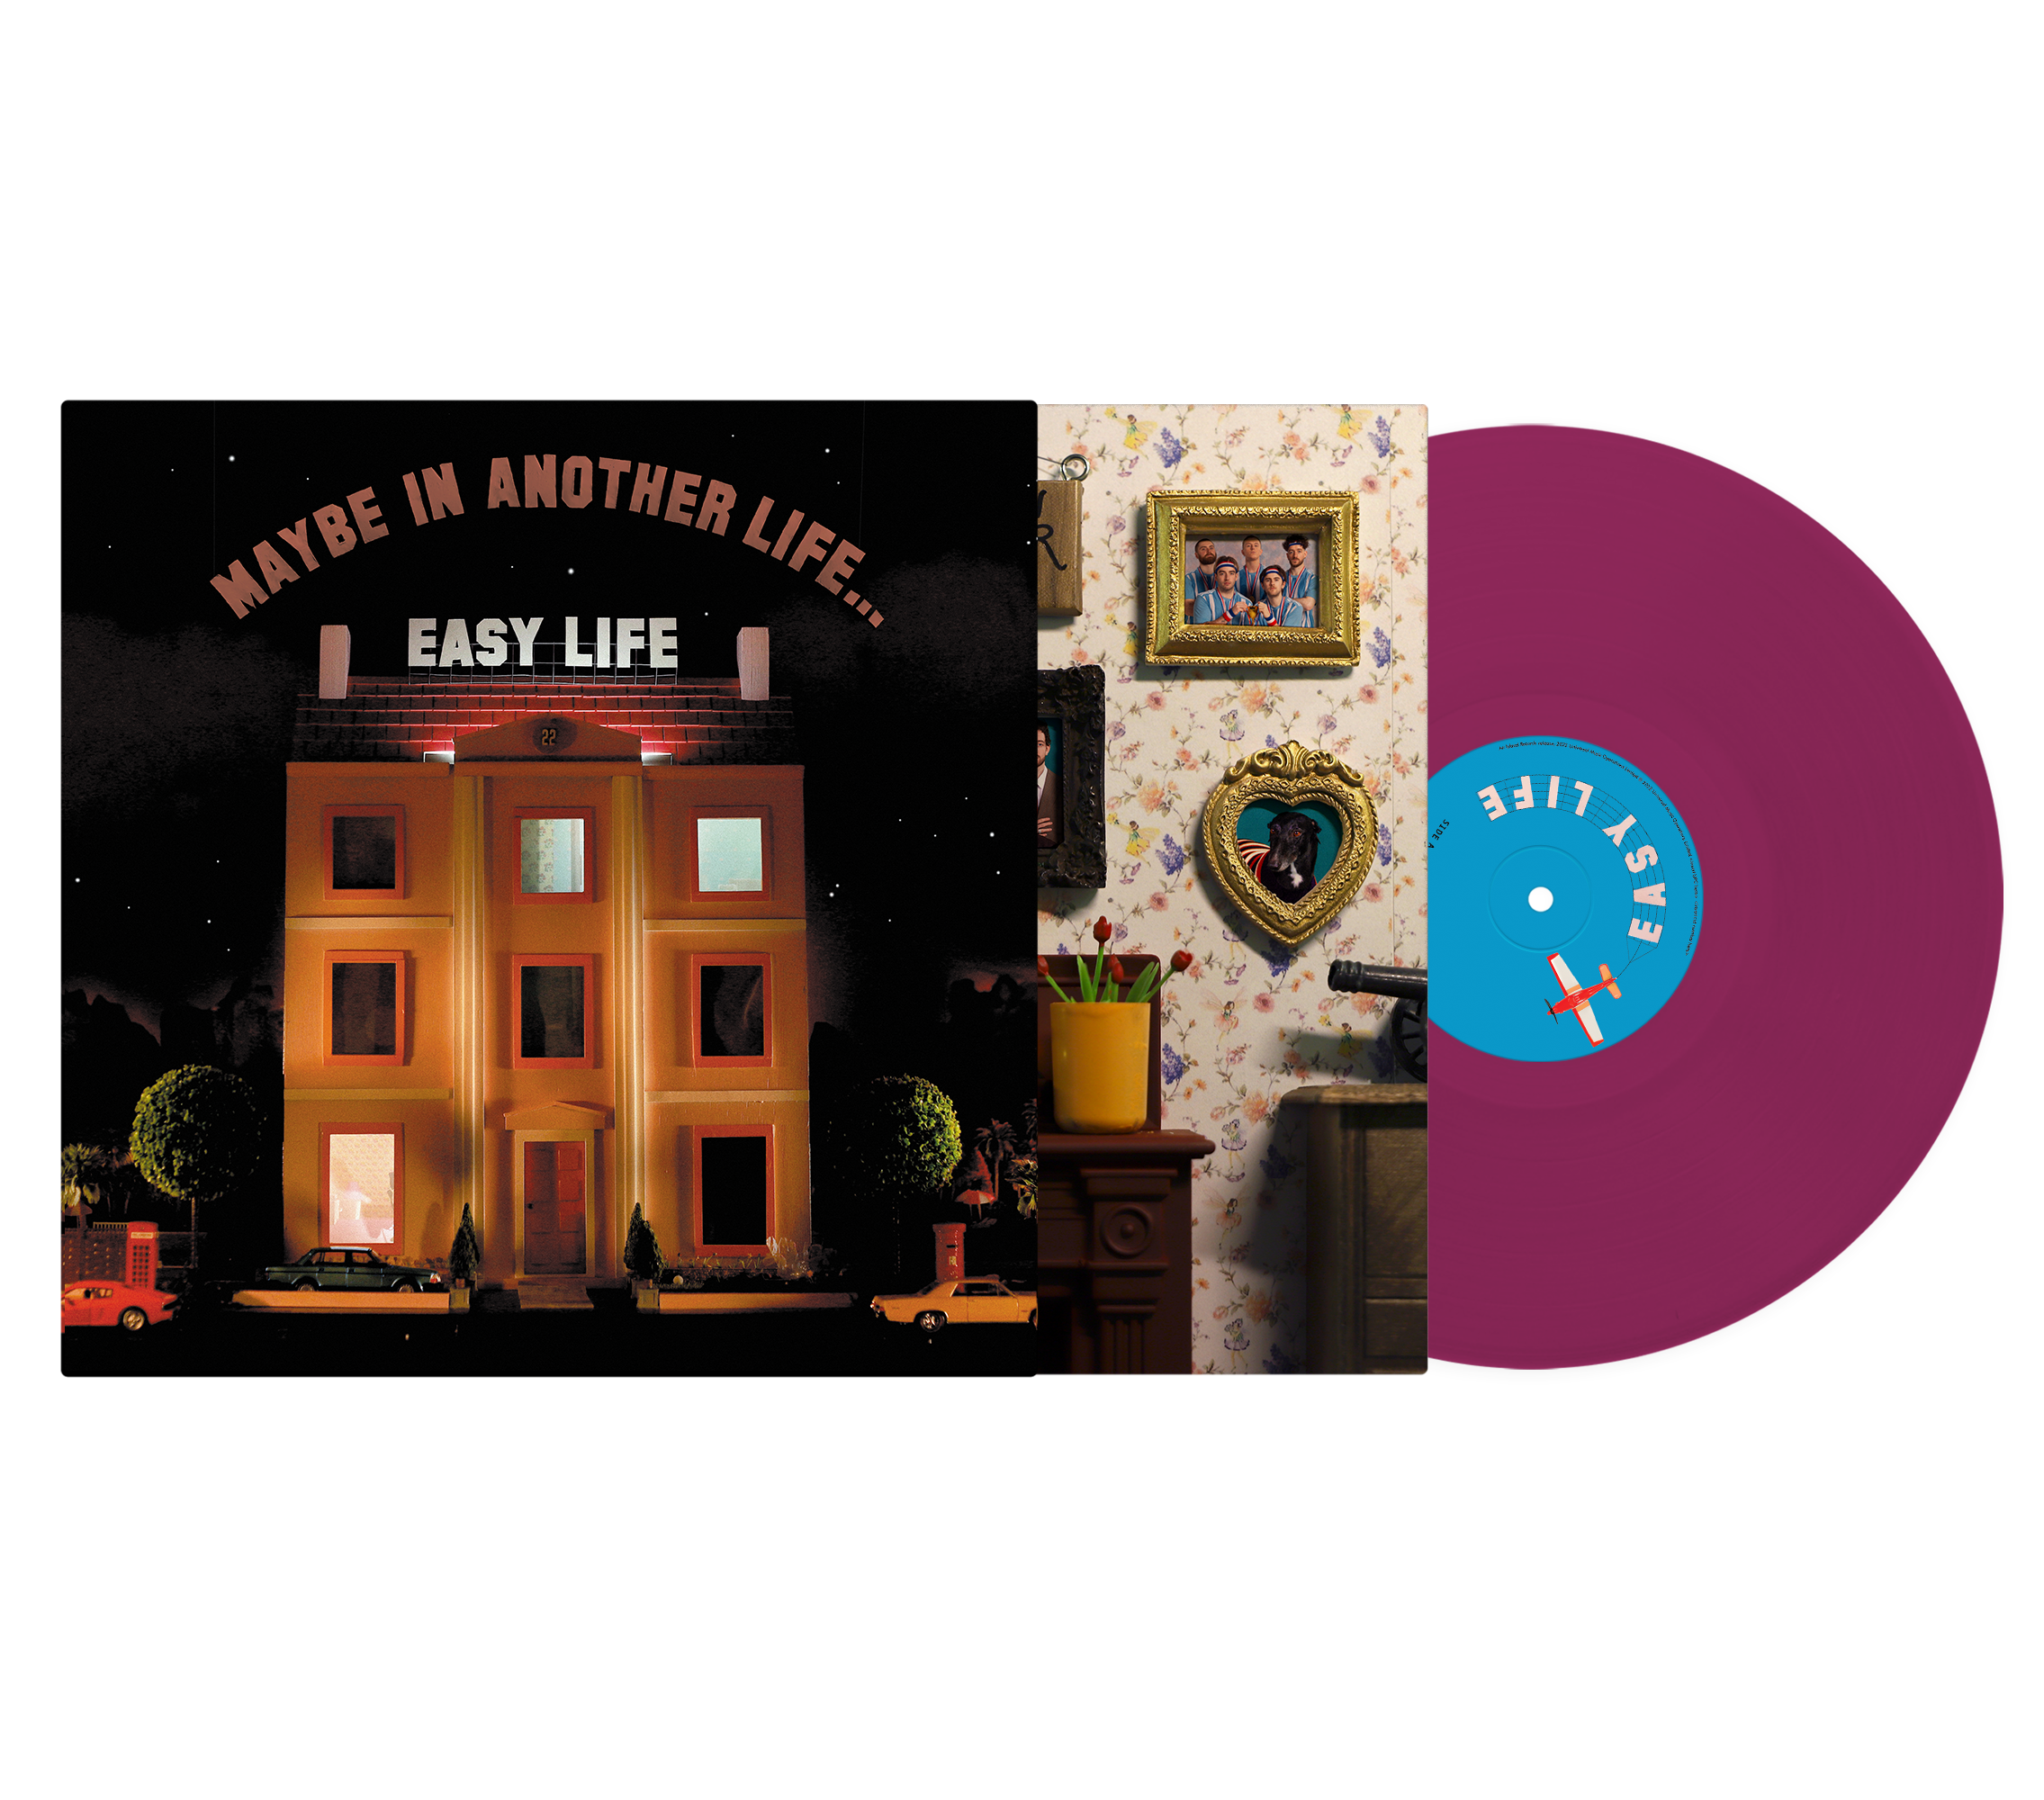 easy life - Maybe In Another Life: Signed Limited Purple Vinyl LP